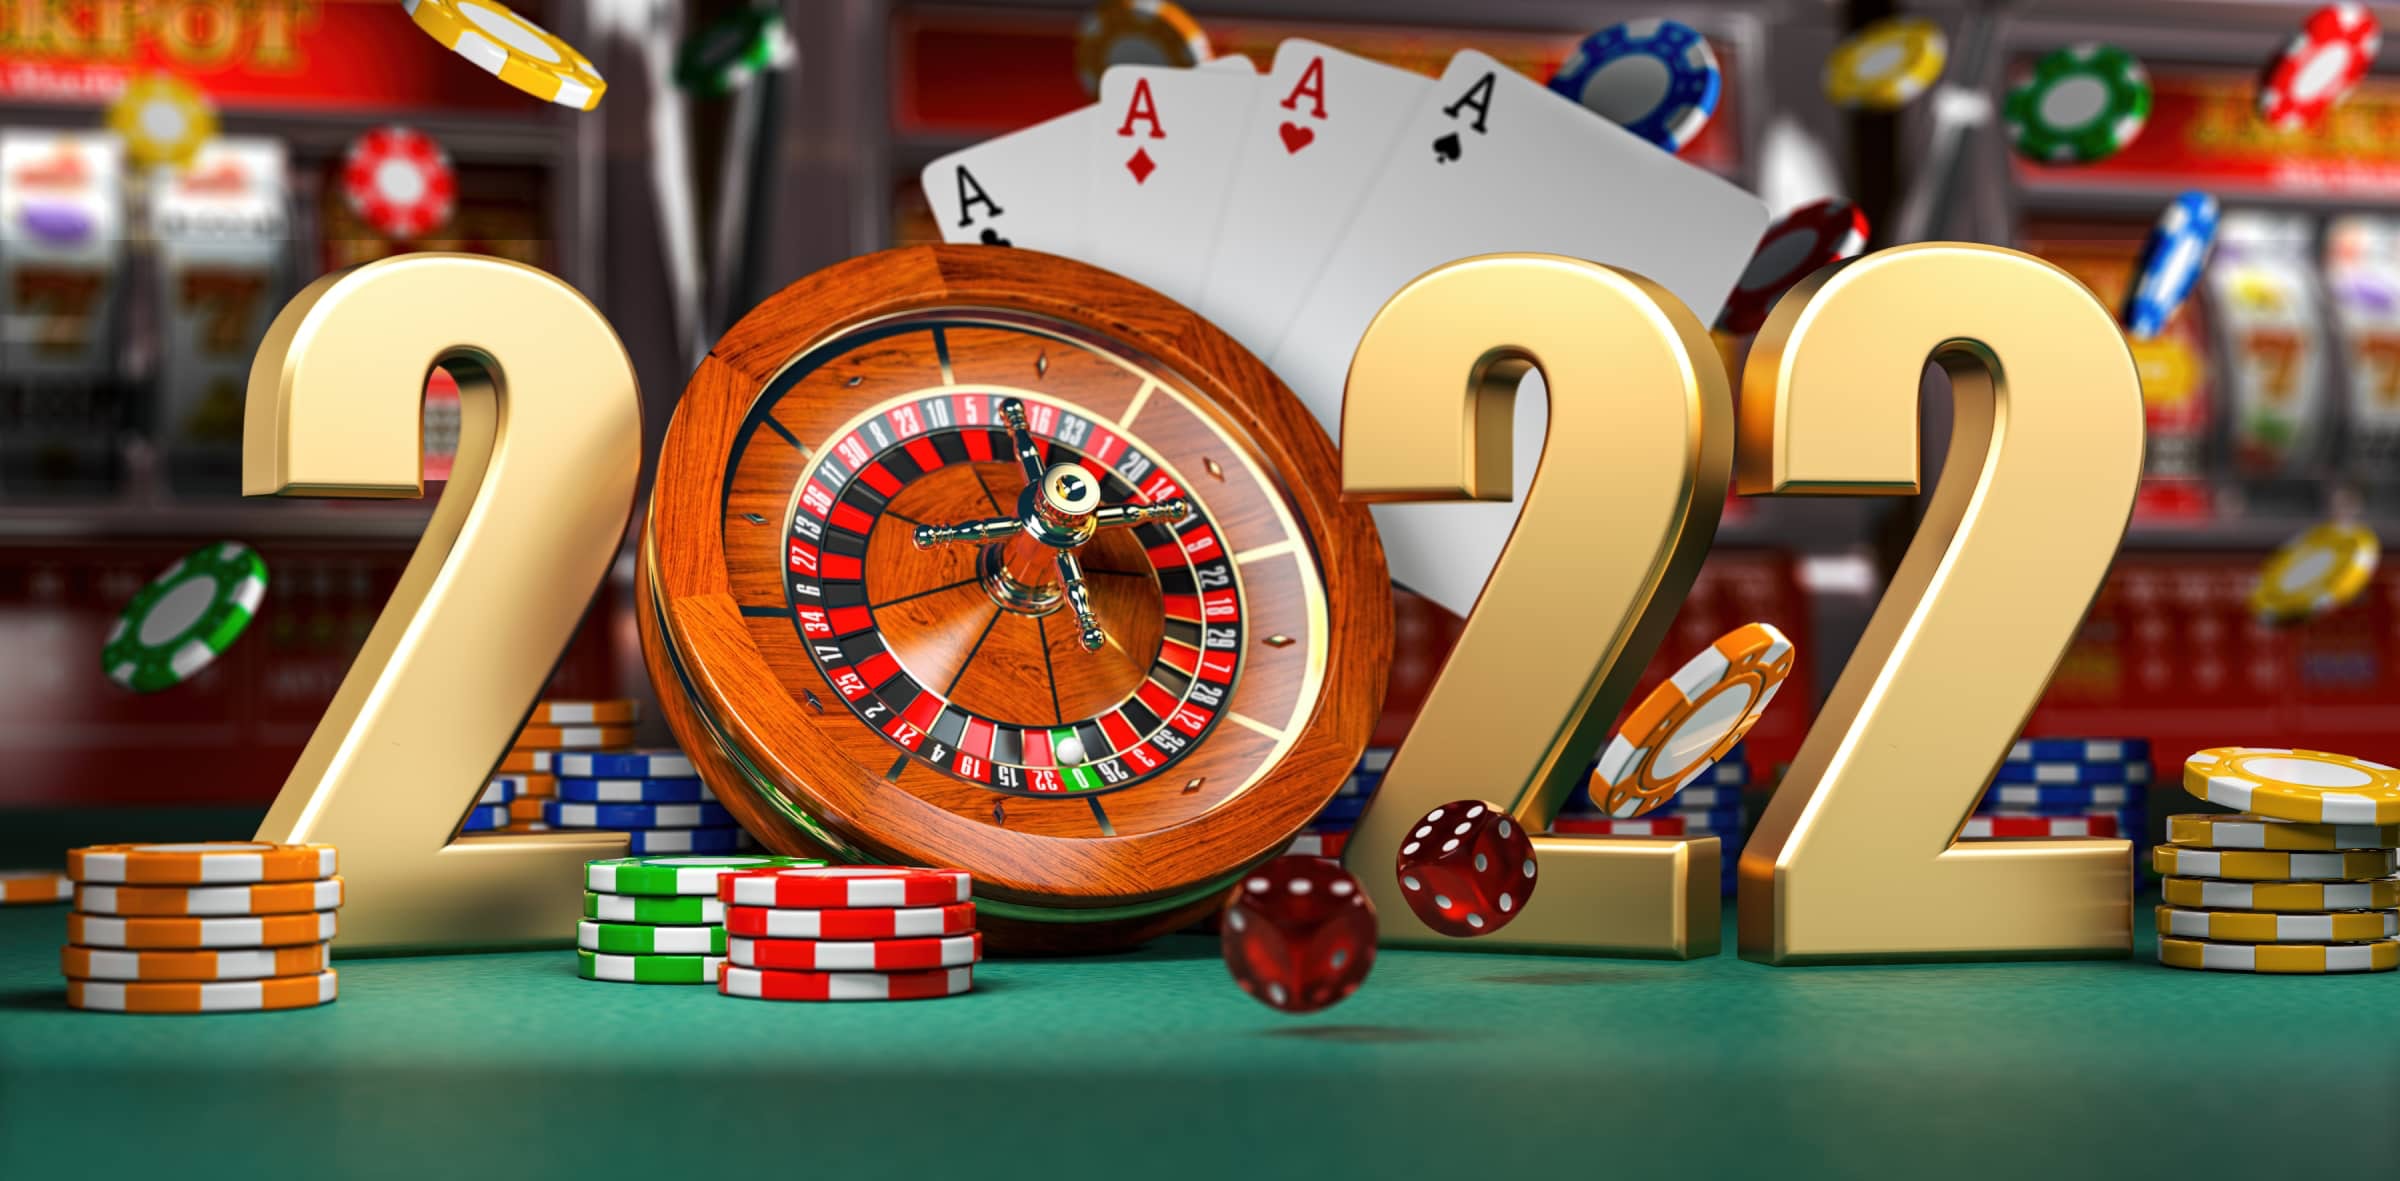 Can You Pass The online casino sites Test?